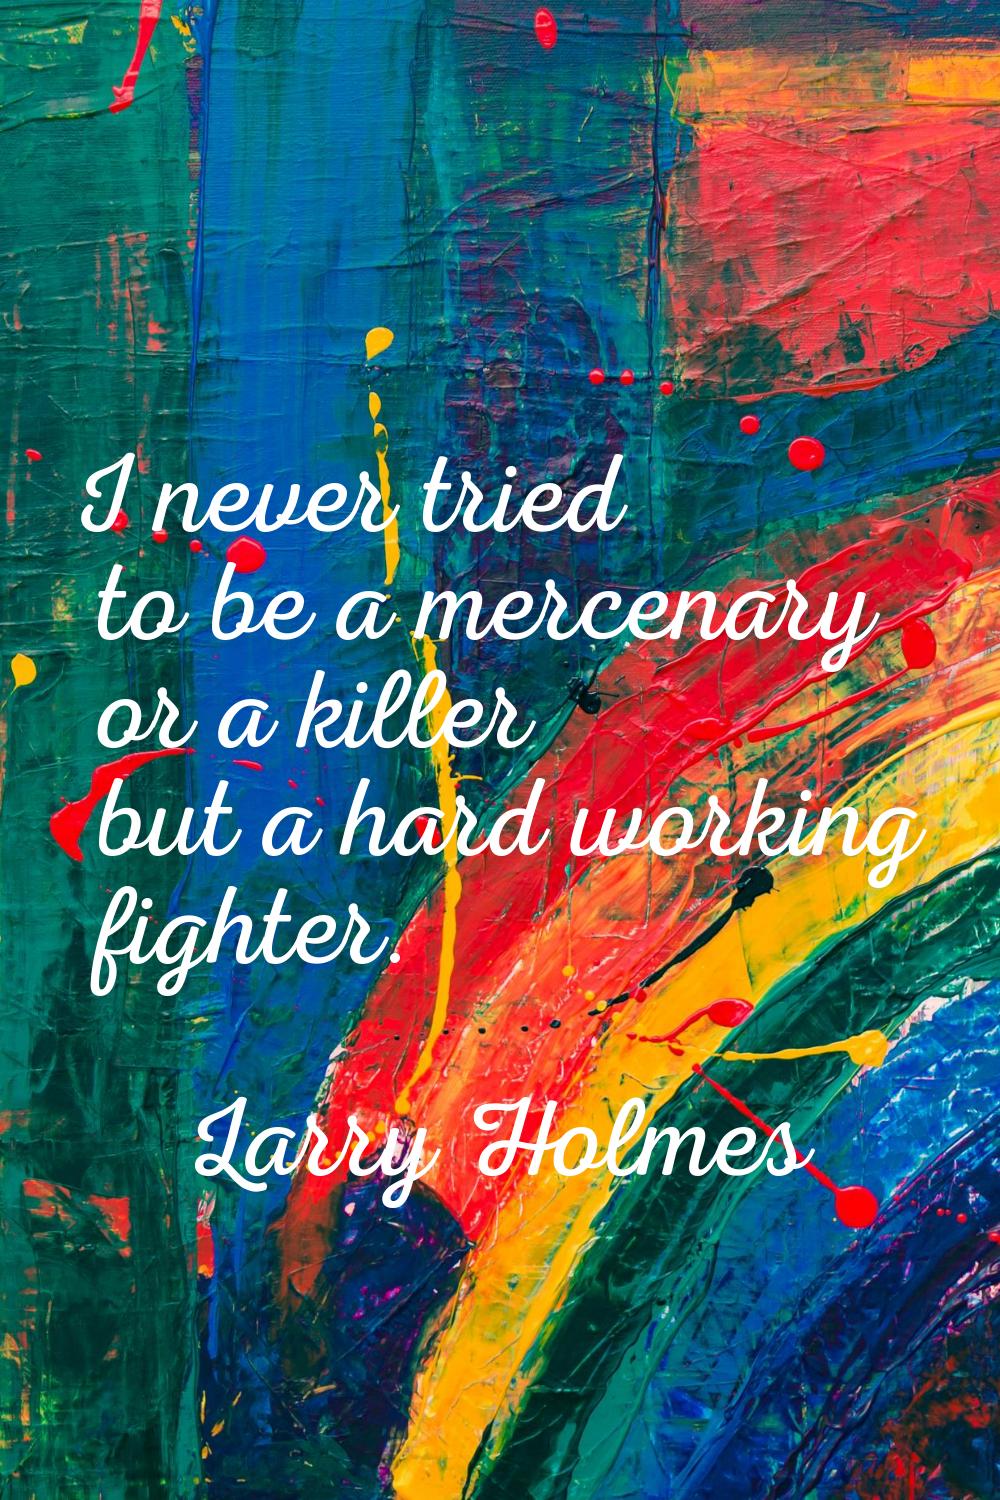 I never tried to be a mercenary or a killer but a hard working fighter.